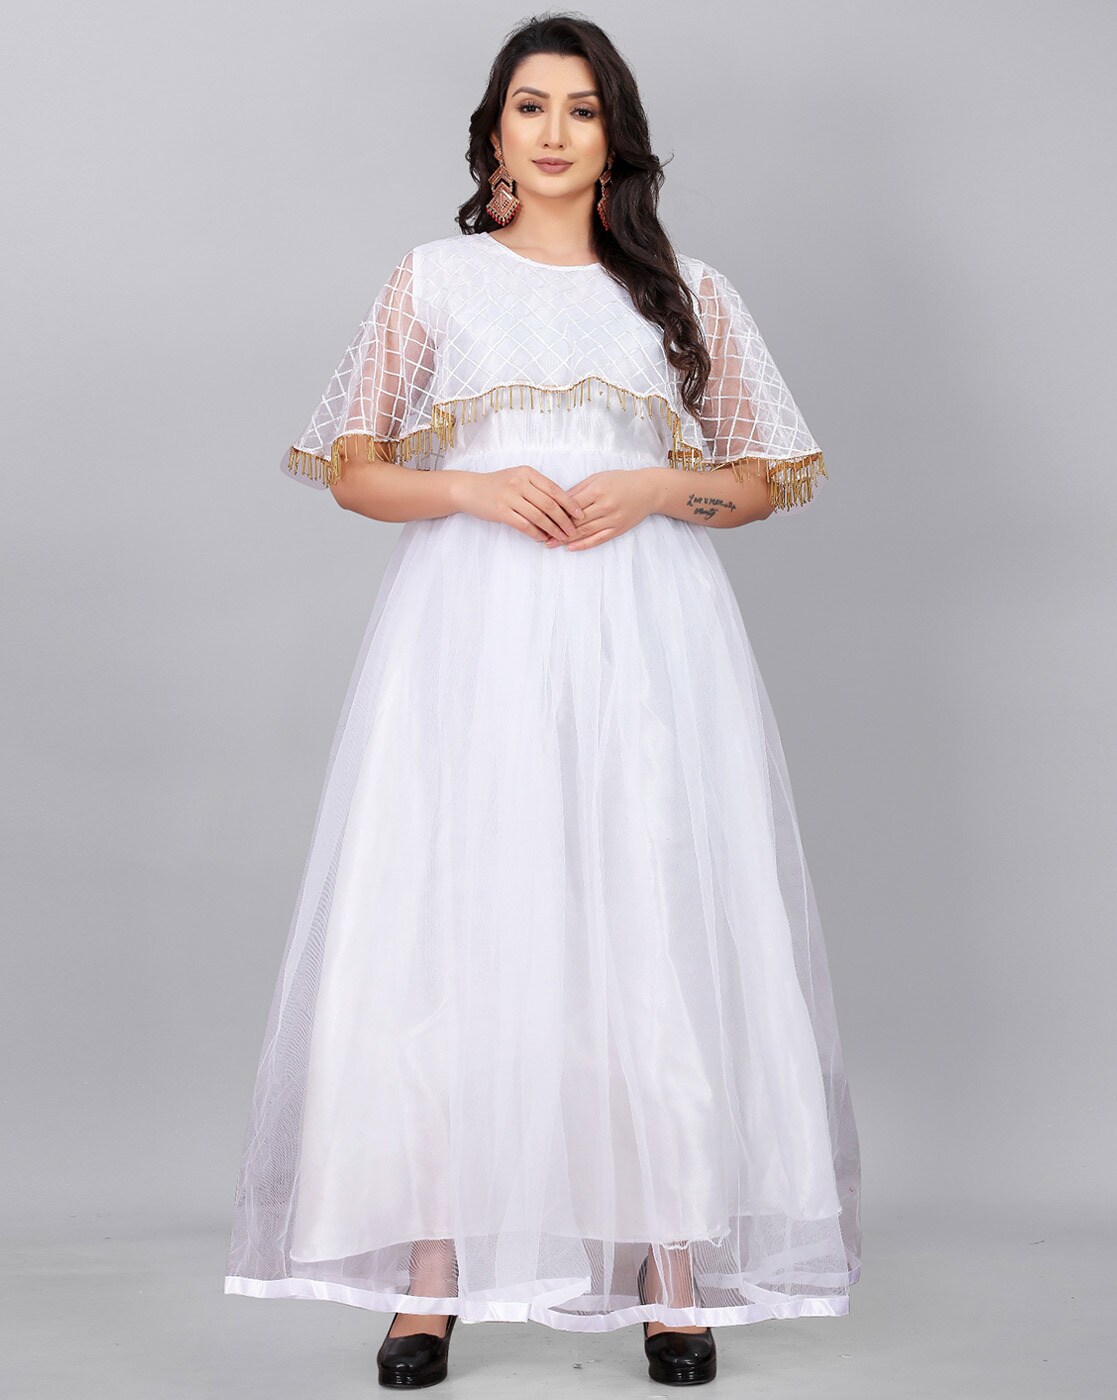 Exclusive Designer Net Gown For Women Floral Bride Gown Indian Wedding  Reception Gown Bridal Dress Indian Suit Floral Anarkali White Gown at Rs  1799.00 | Surat| ID: 26440674430